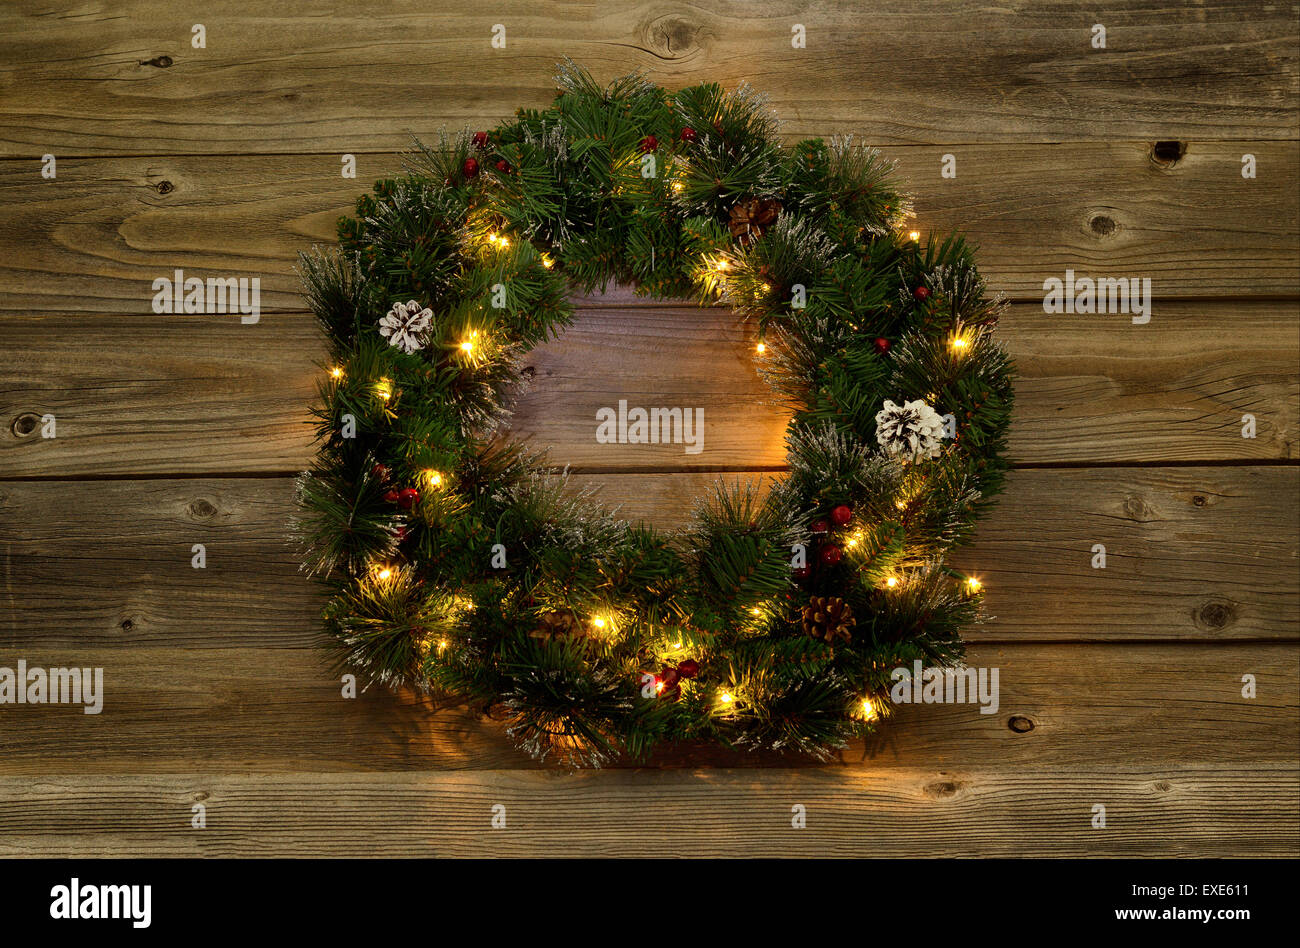 Christmas wreath with white lights on rustic wooden boards.  Low lighting to bring out glow of lights. Stock Photo